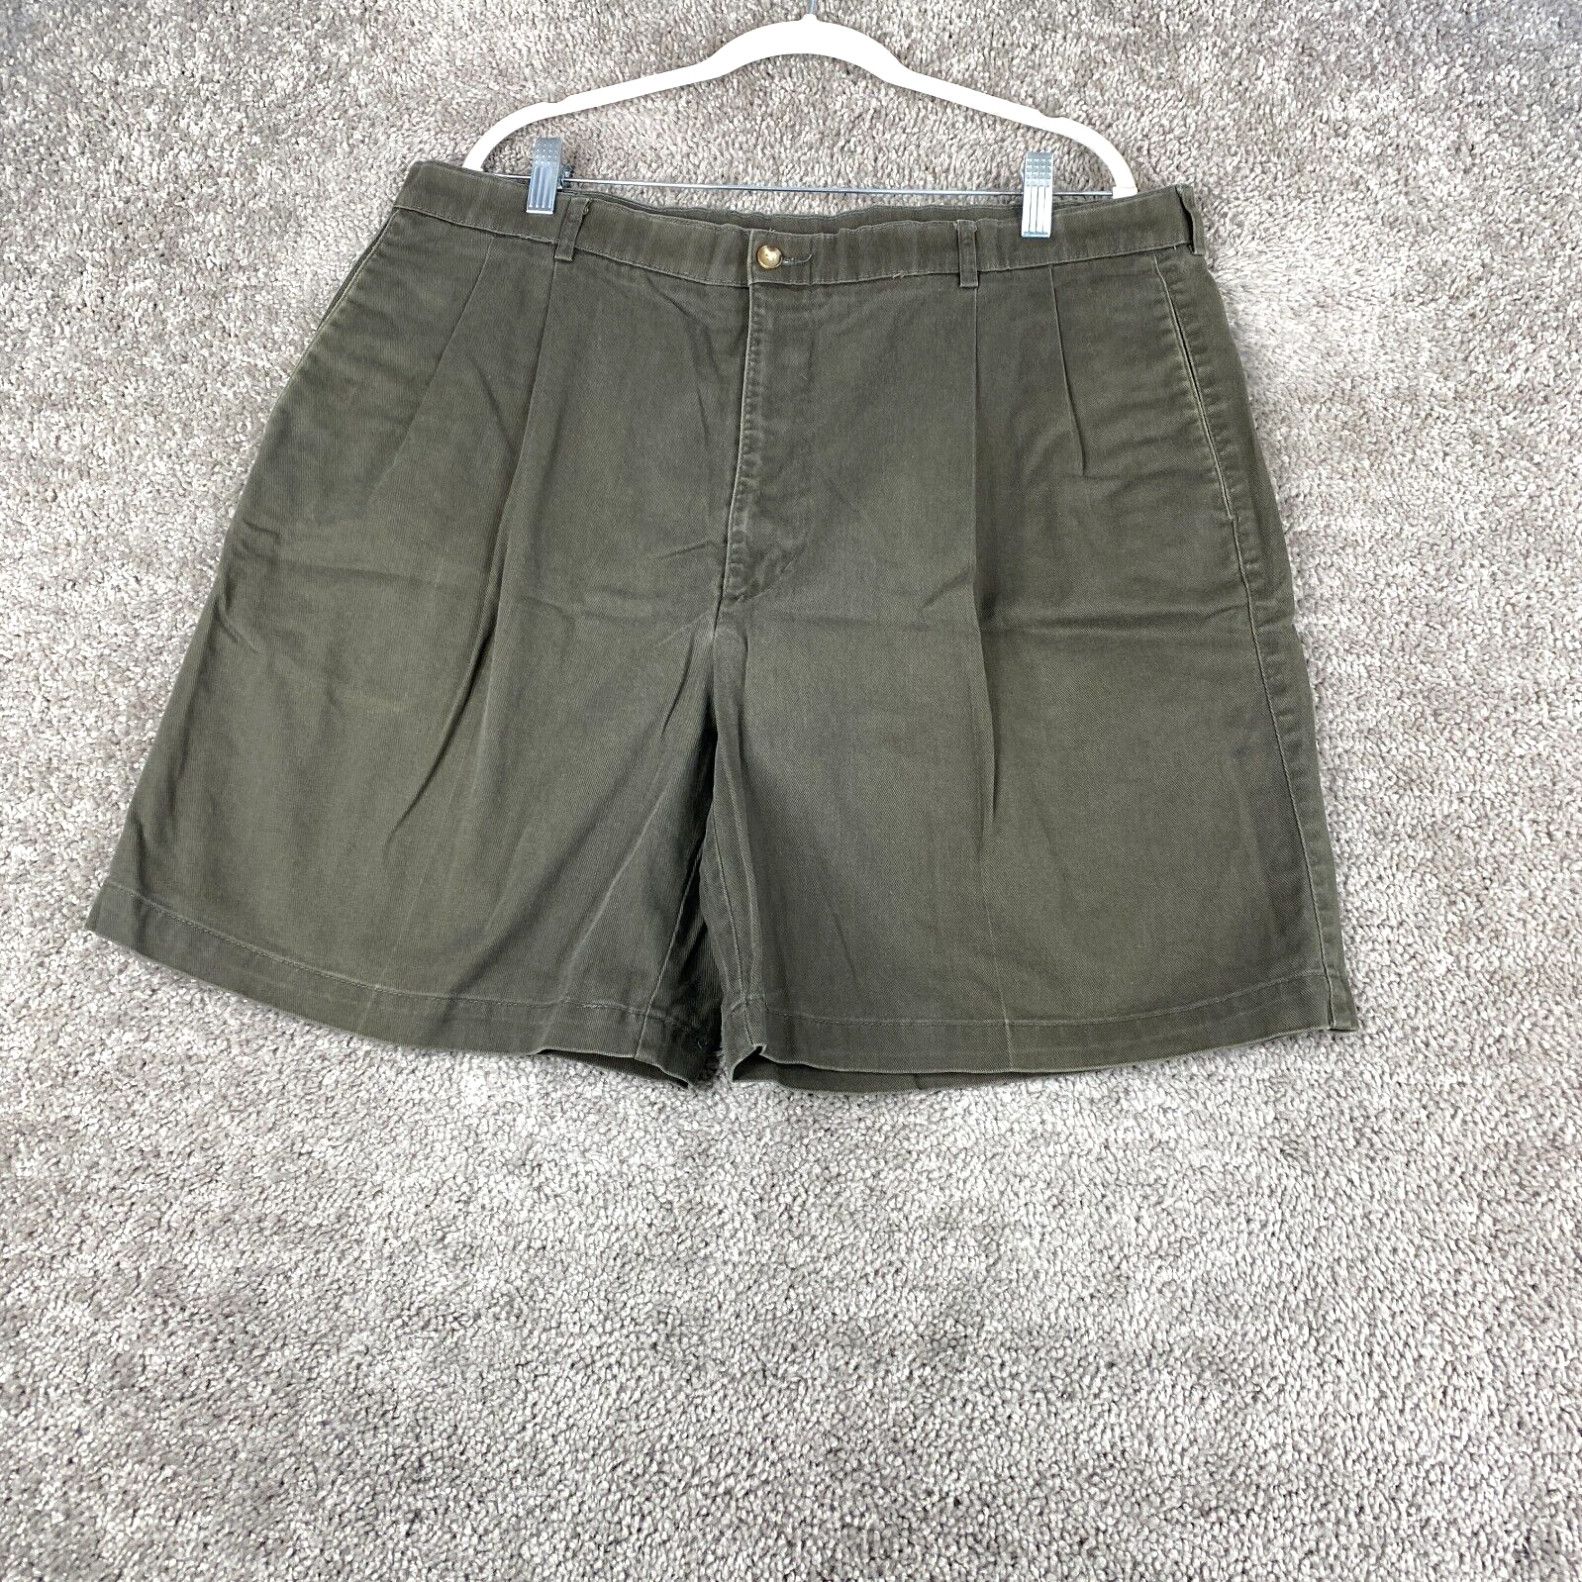 Haggar Haggar Clothing Co. Chino Shorts Men's Size 40 Green Pleated Front Pure Cotton Size US 40 / EU 56 - 1 Preview